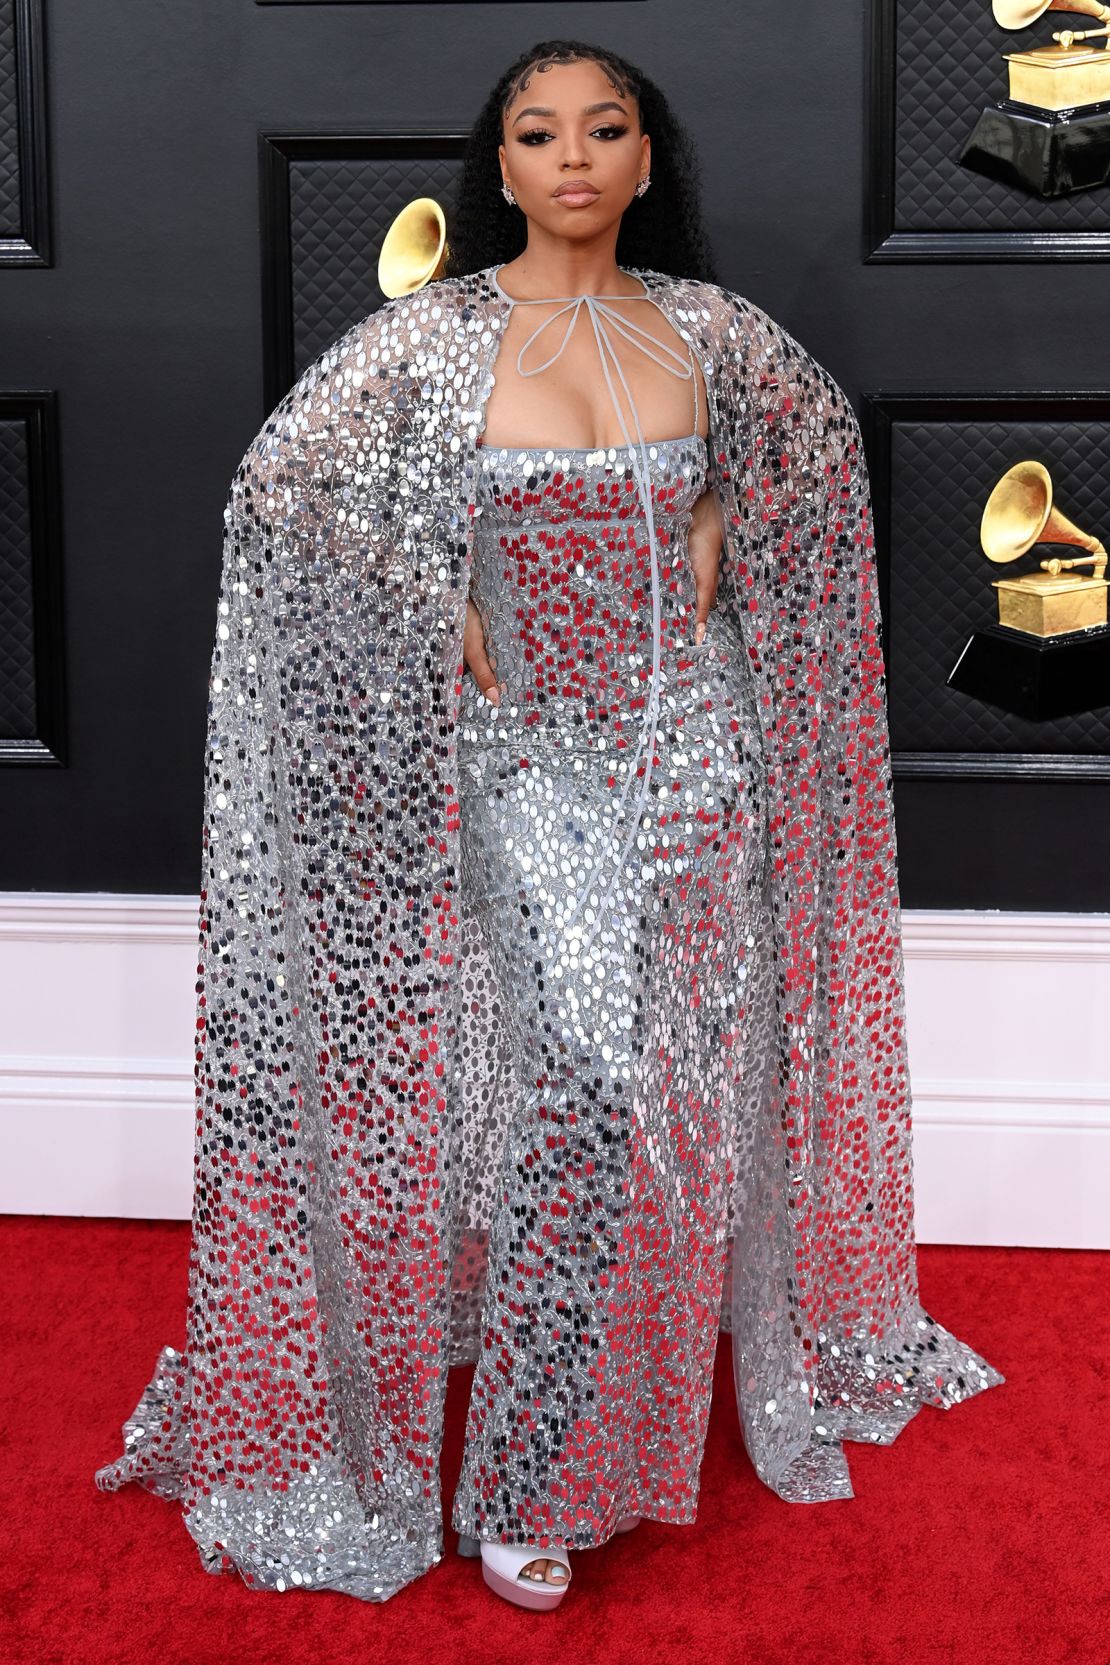 Chloe Bailey wowed in a floor-length silver sequined gown, later tweeting "ima disco ball baby."